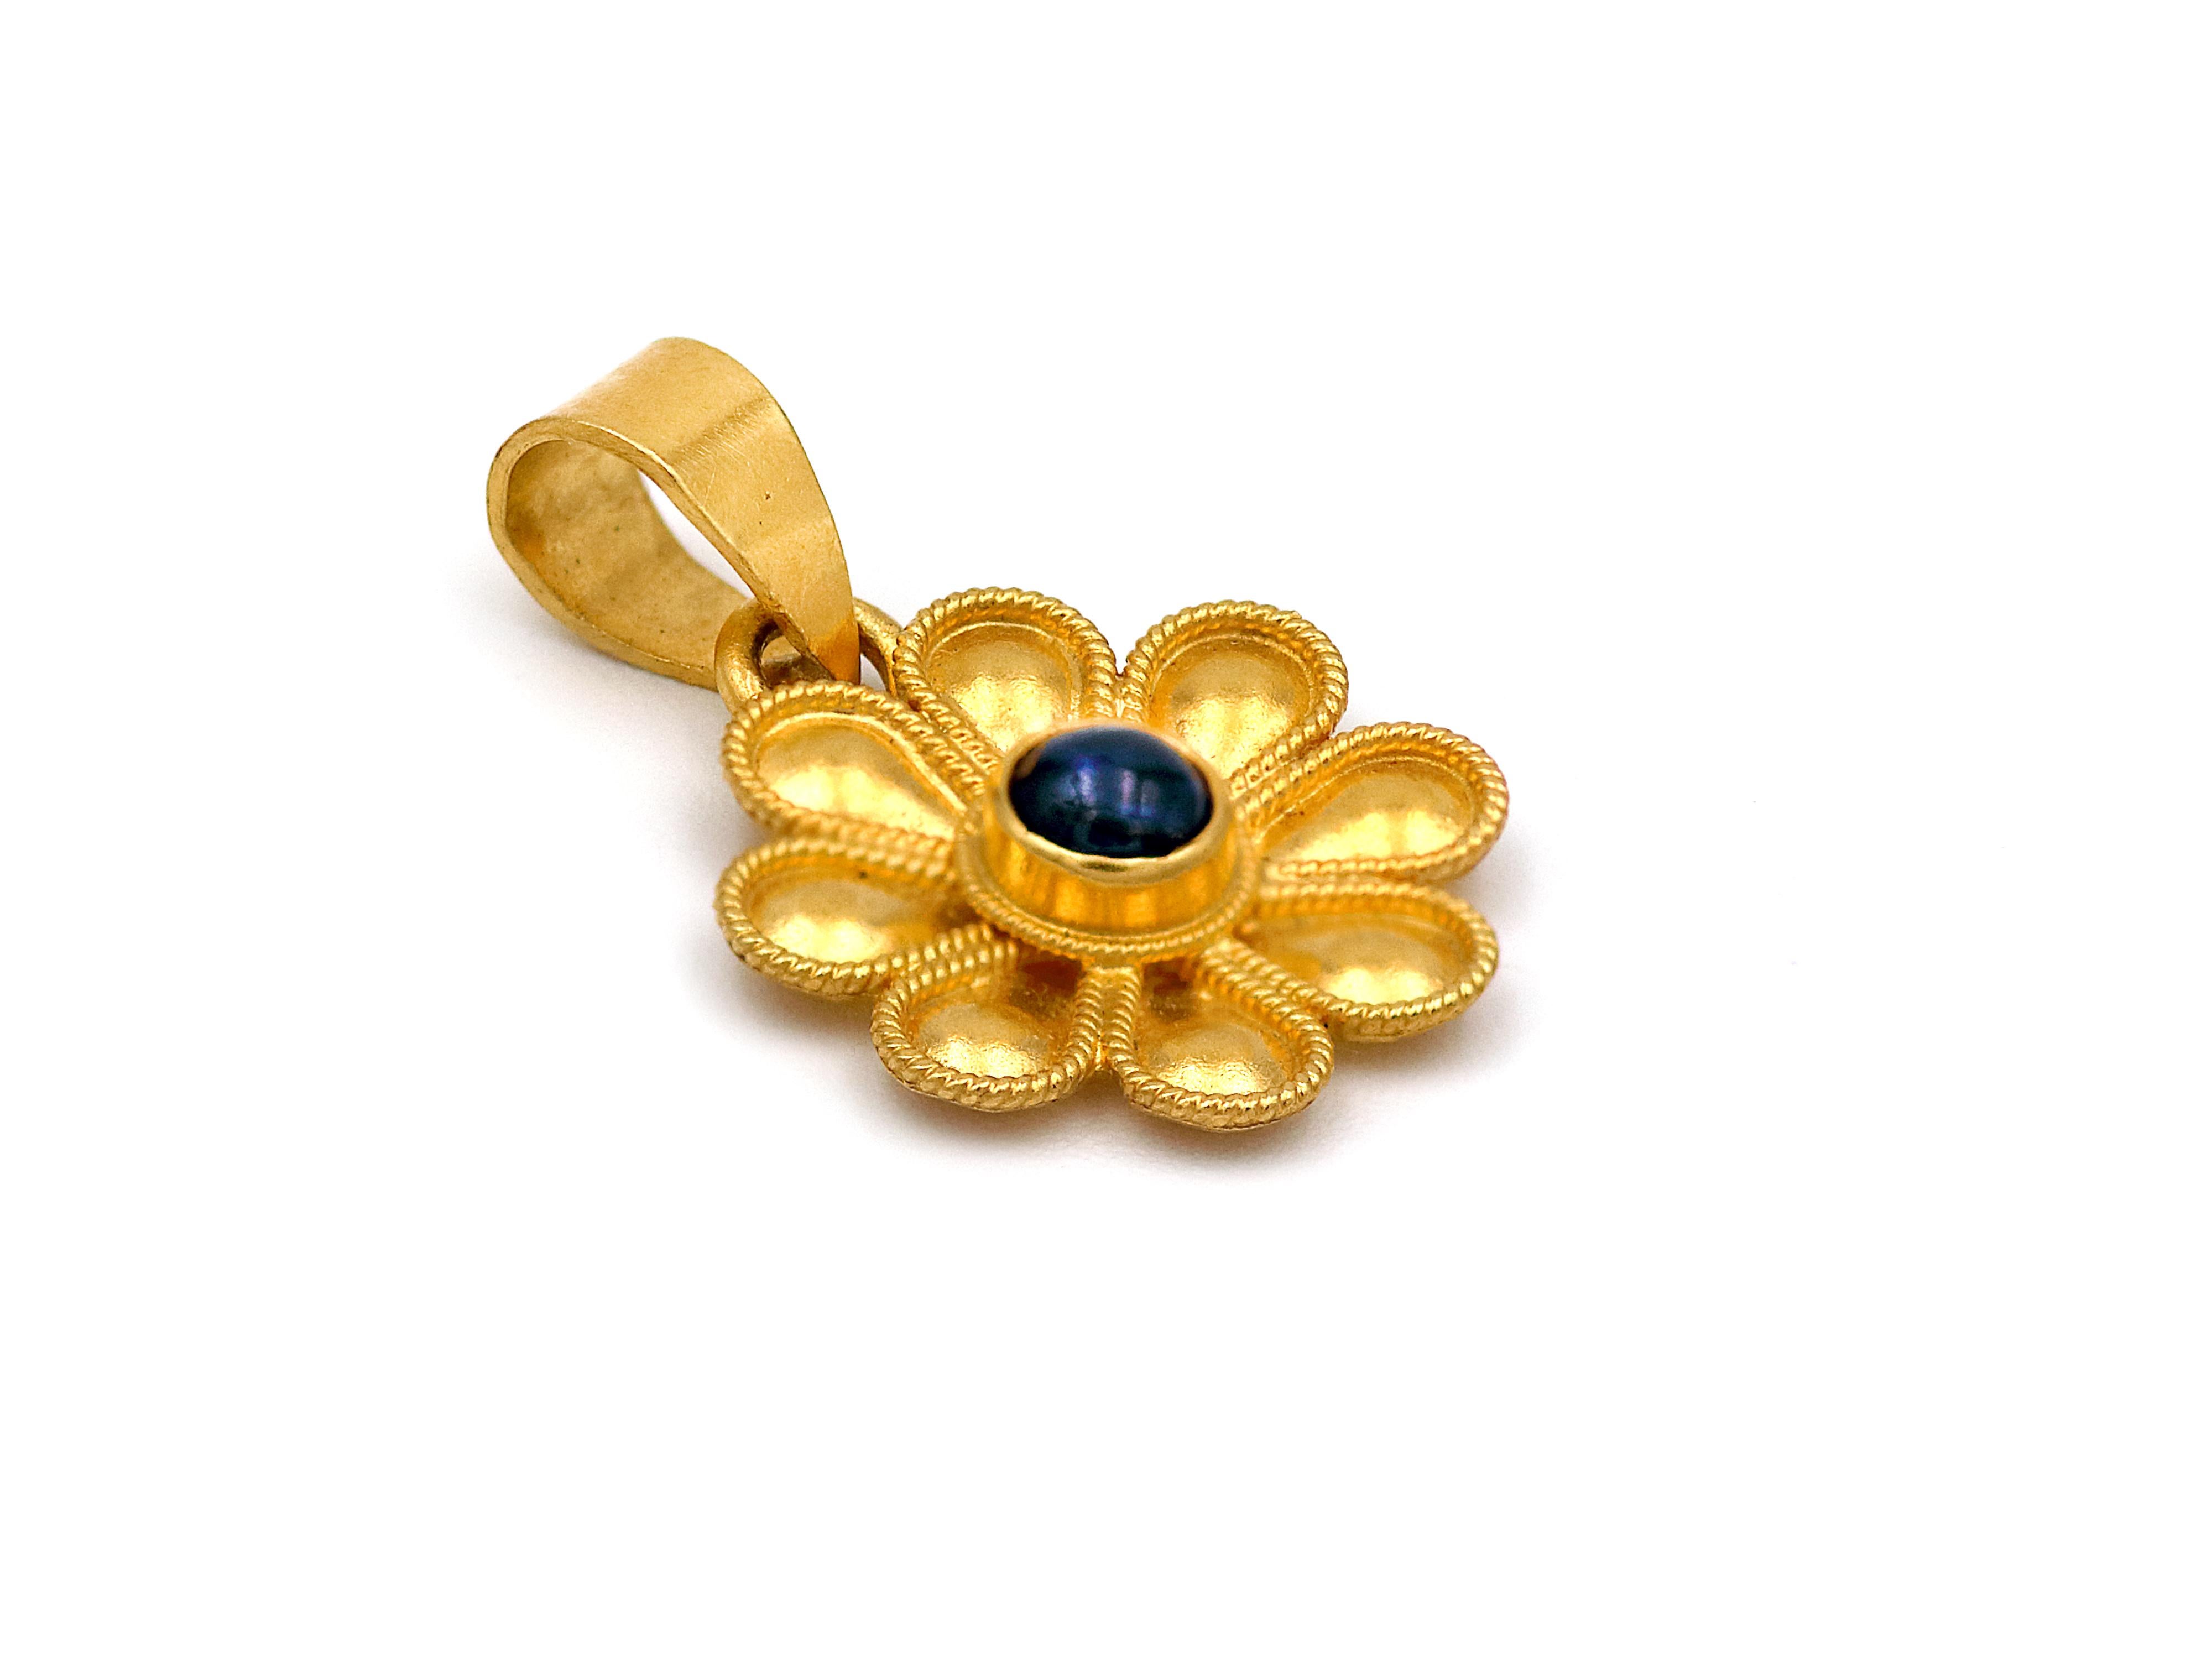 The daisy pendant in its sweetest version set in 22k yellow gold. A museum legend that it’s been so presented in our history here in a simple single leaf and set with Lapis Lazuli that creates a beautiful color difference. A super daily symbol of